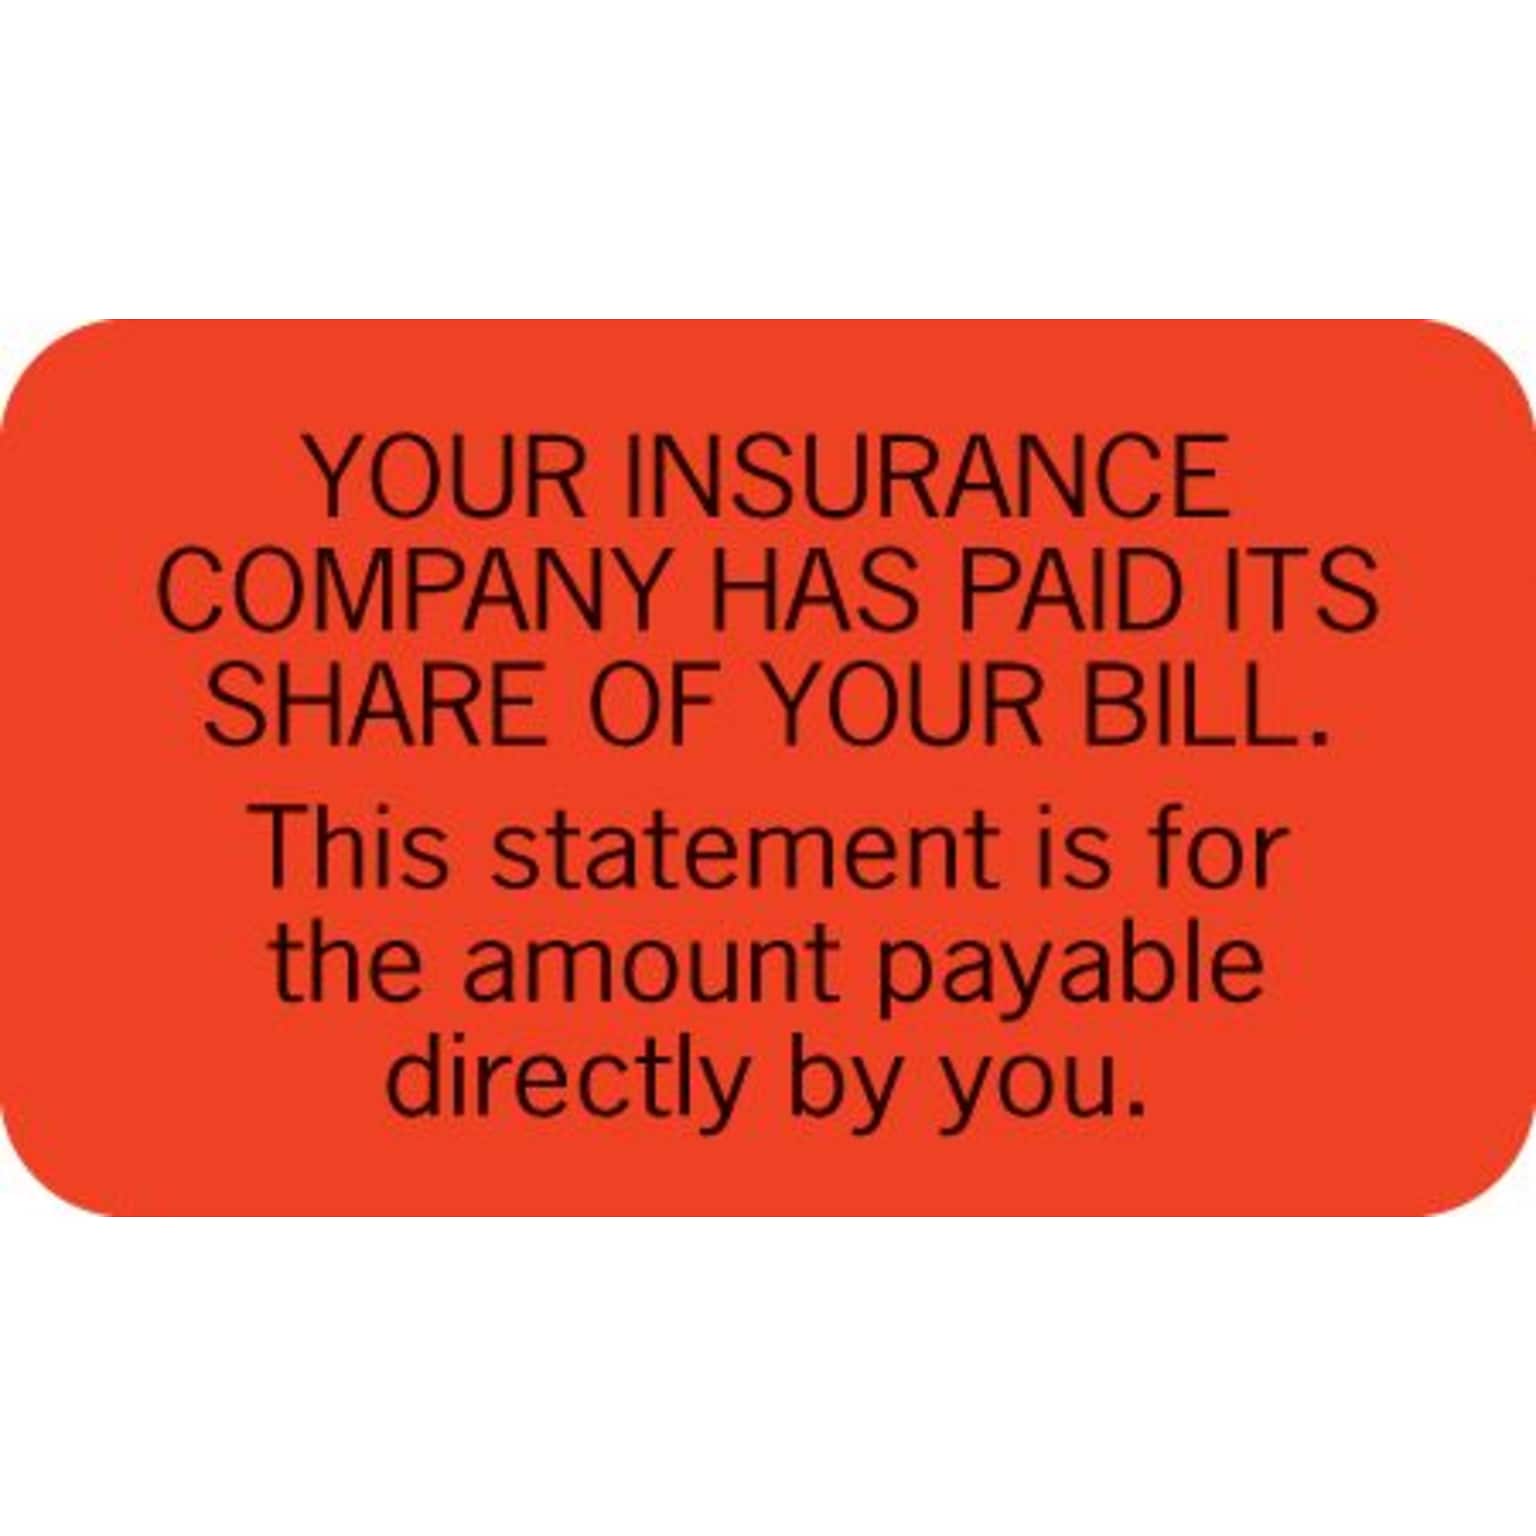 Medical Arts Press® Patient Insurance Labels, Insurance Paid Its Share, Fluorescent Red, 7/8x1-1/2, 500 Labels